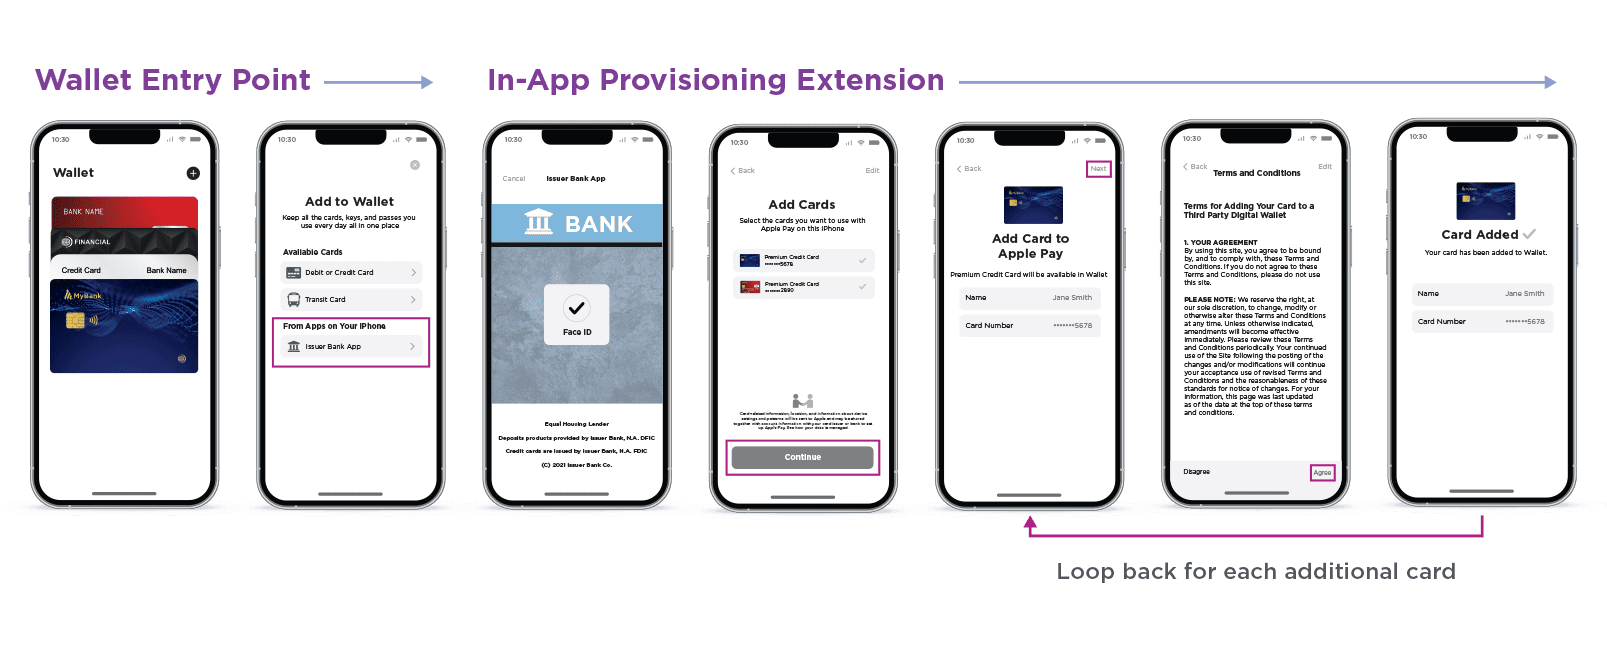 Entrust Digital Card Solution launches new In-app Provisioning extension for Apple Pay – Source: securityboulevard.com